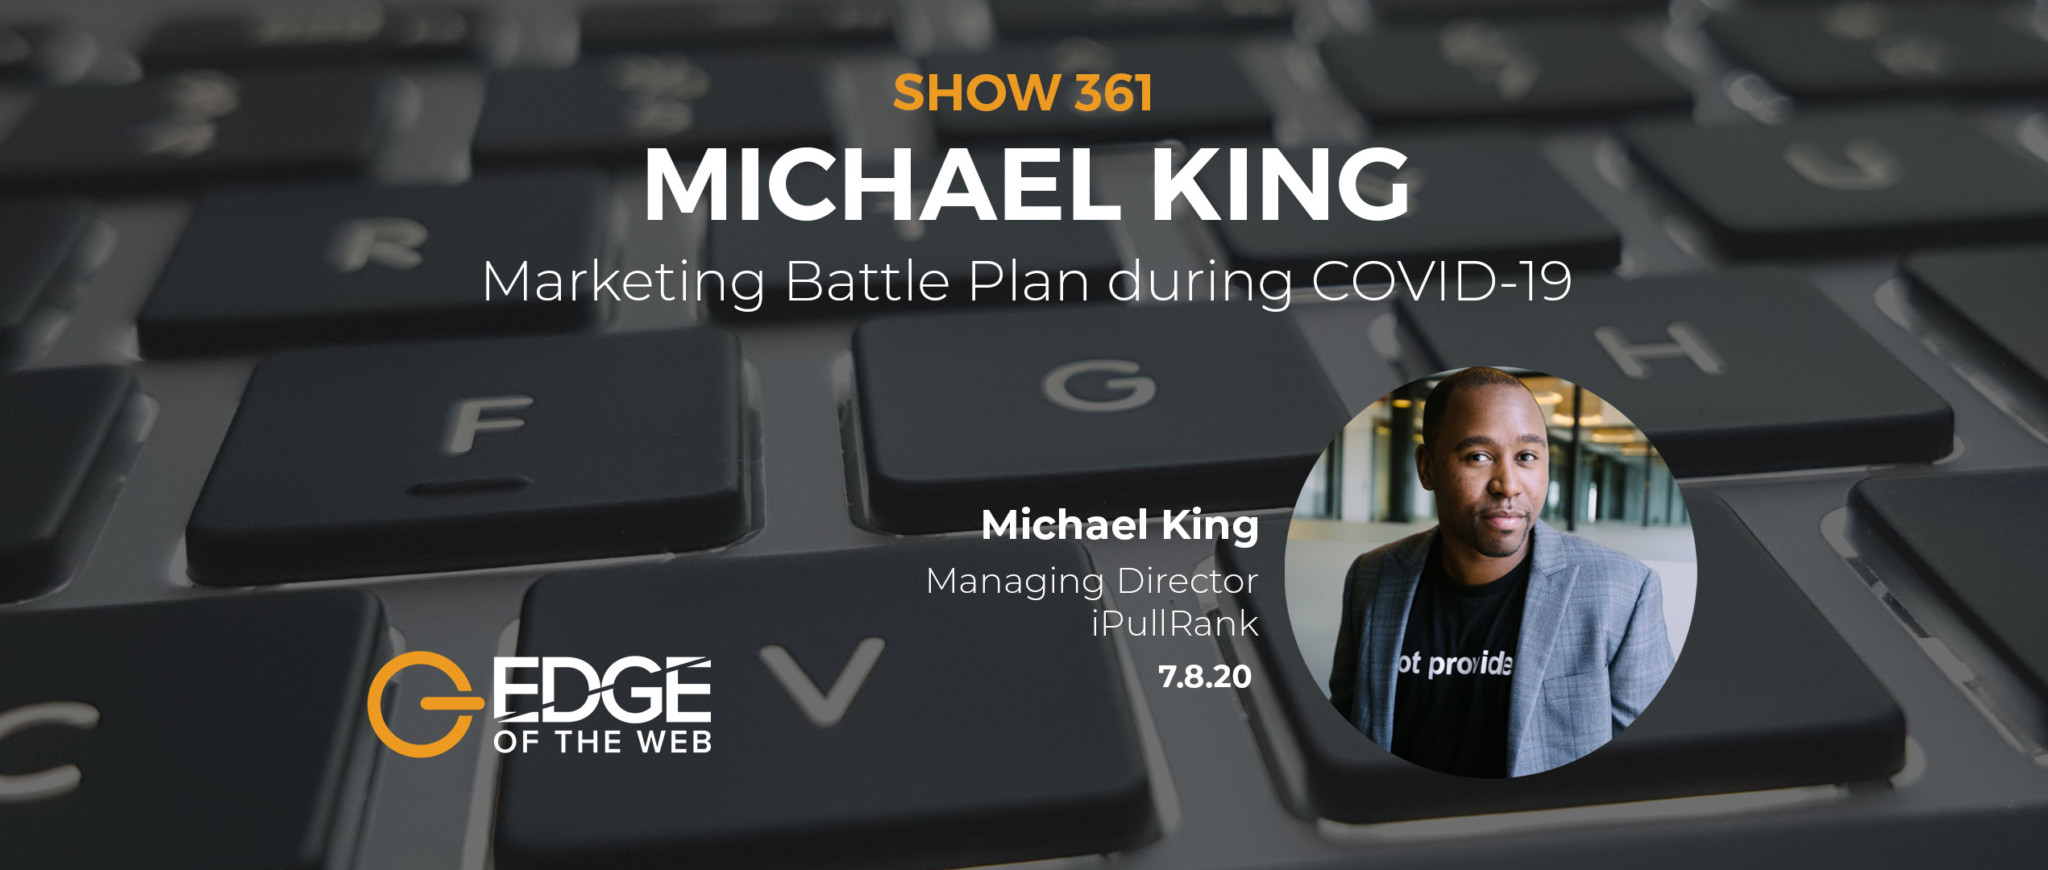 Michael King EDGE Featured Image